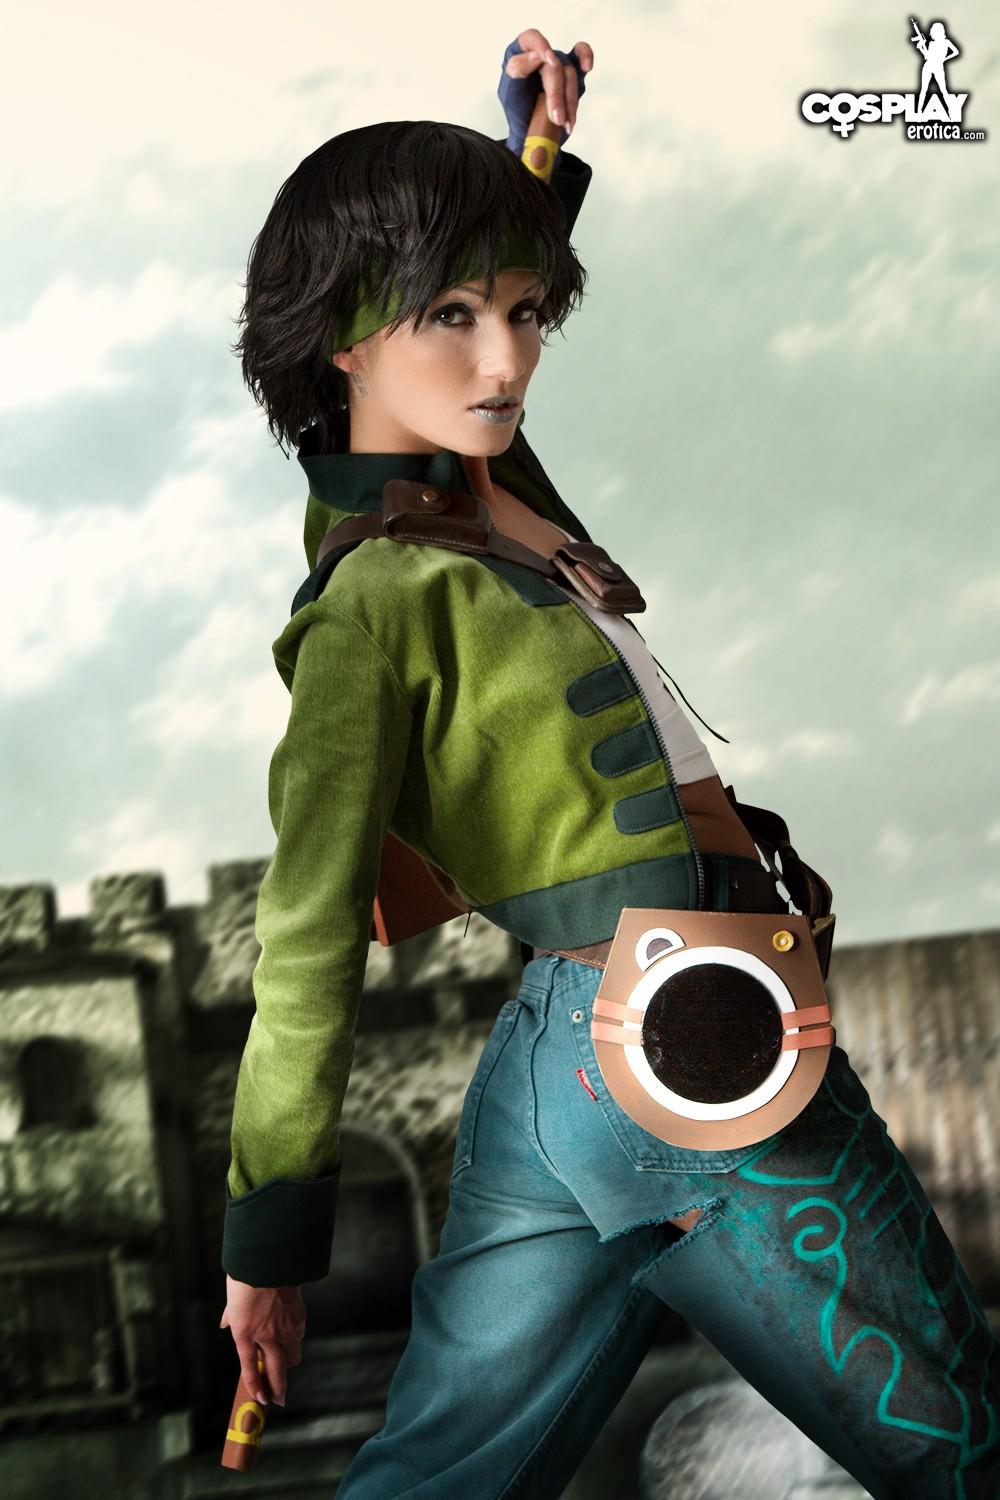 Cosplay hottie Zorah dresses up as Jade from Beyond Good and Evil #60210649